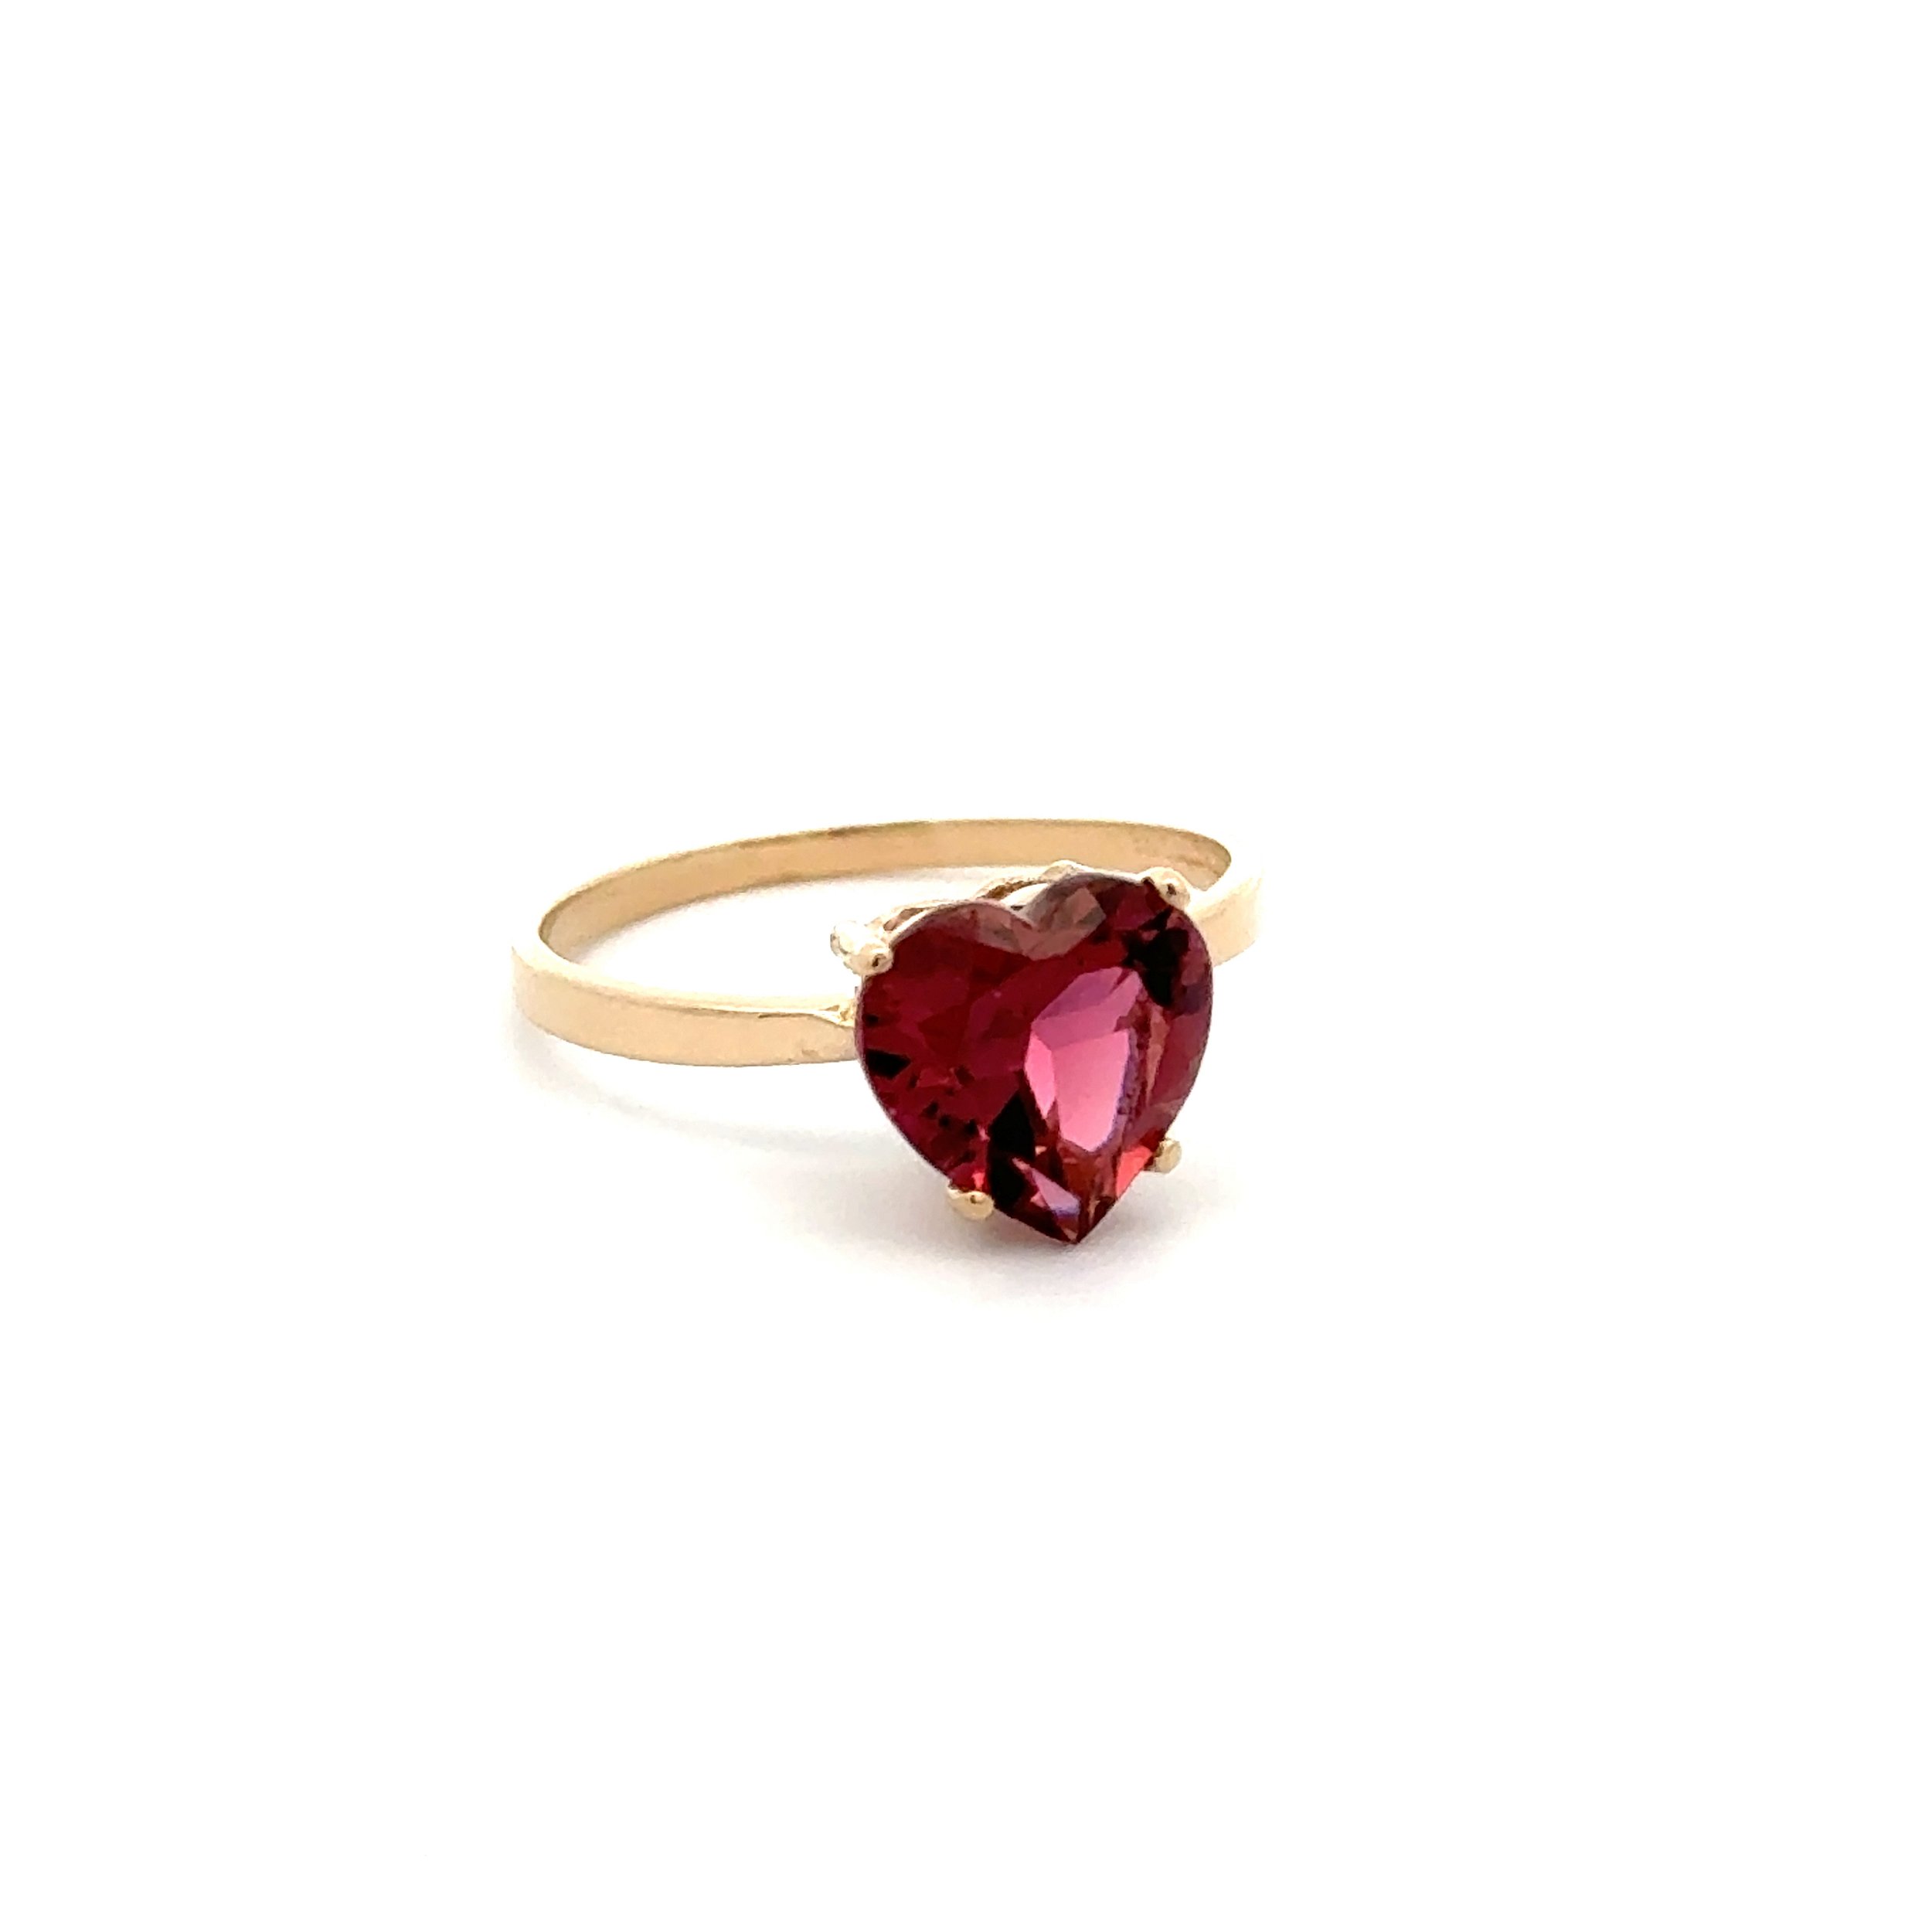 14K YG Gorgeous 2.52ct Heart Rubellite Tourmaline in Solitaire Ring 2.2g, s8